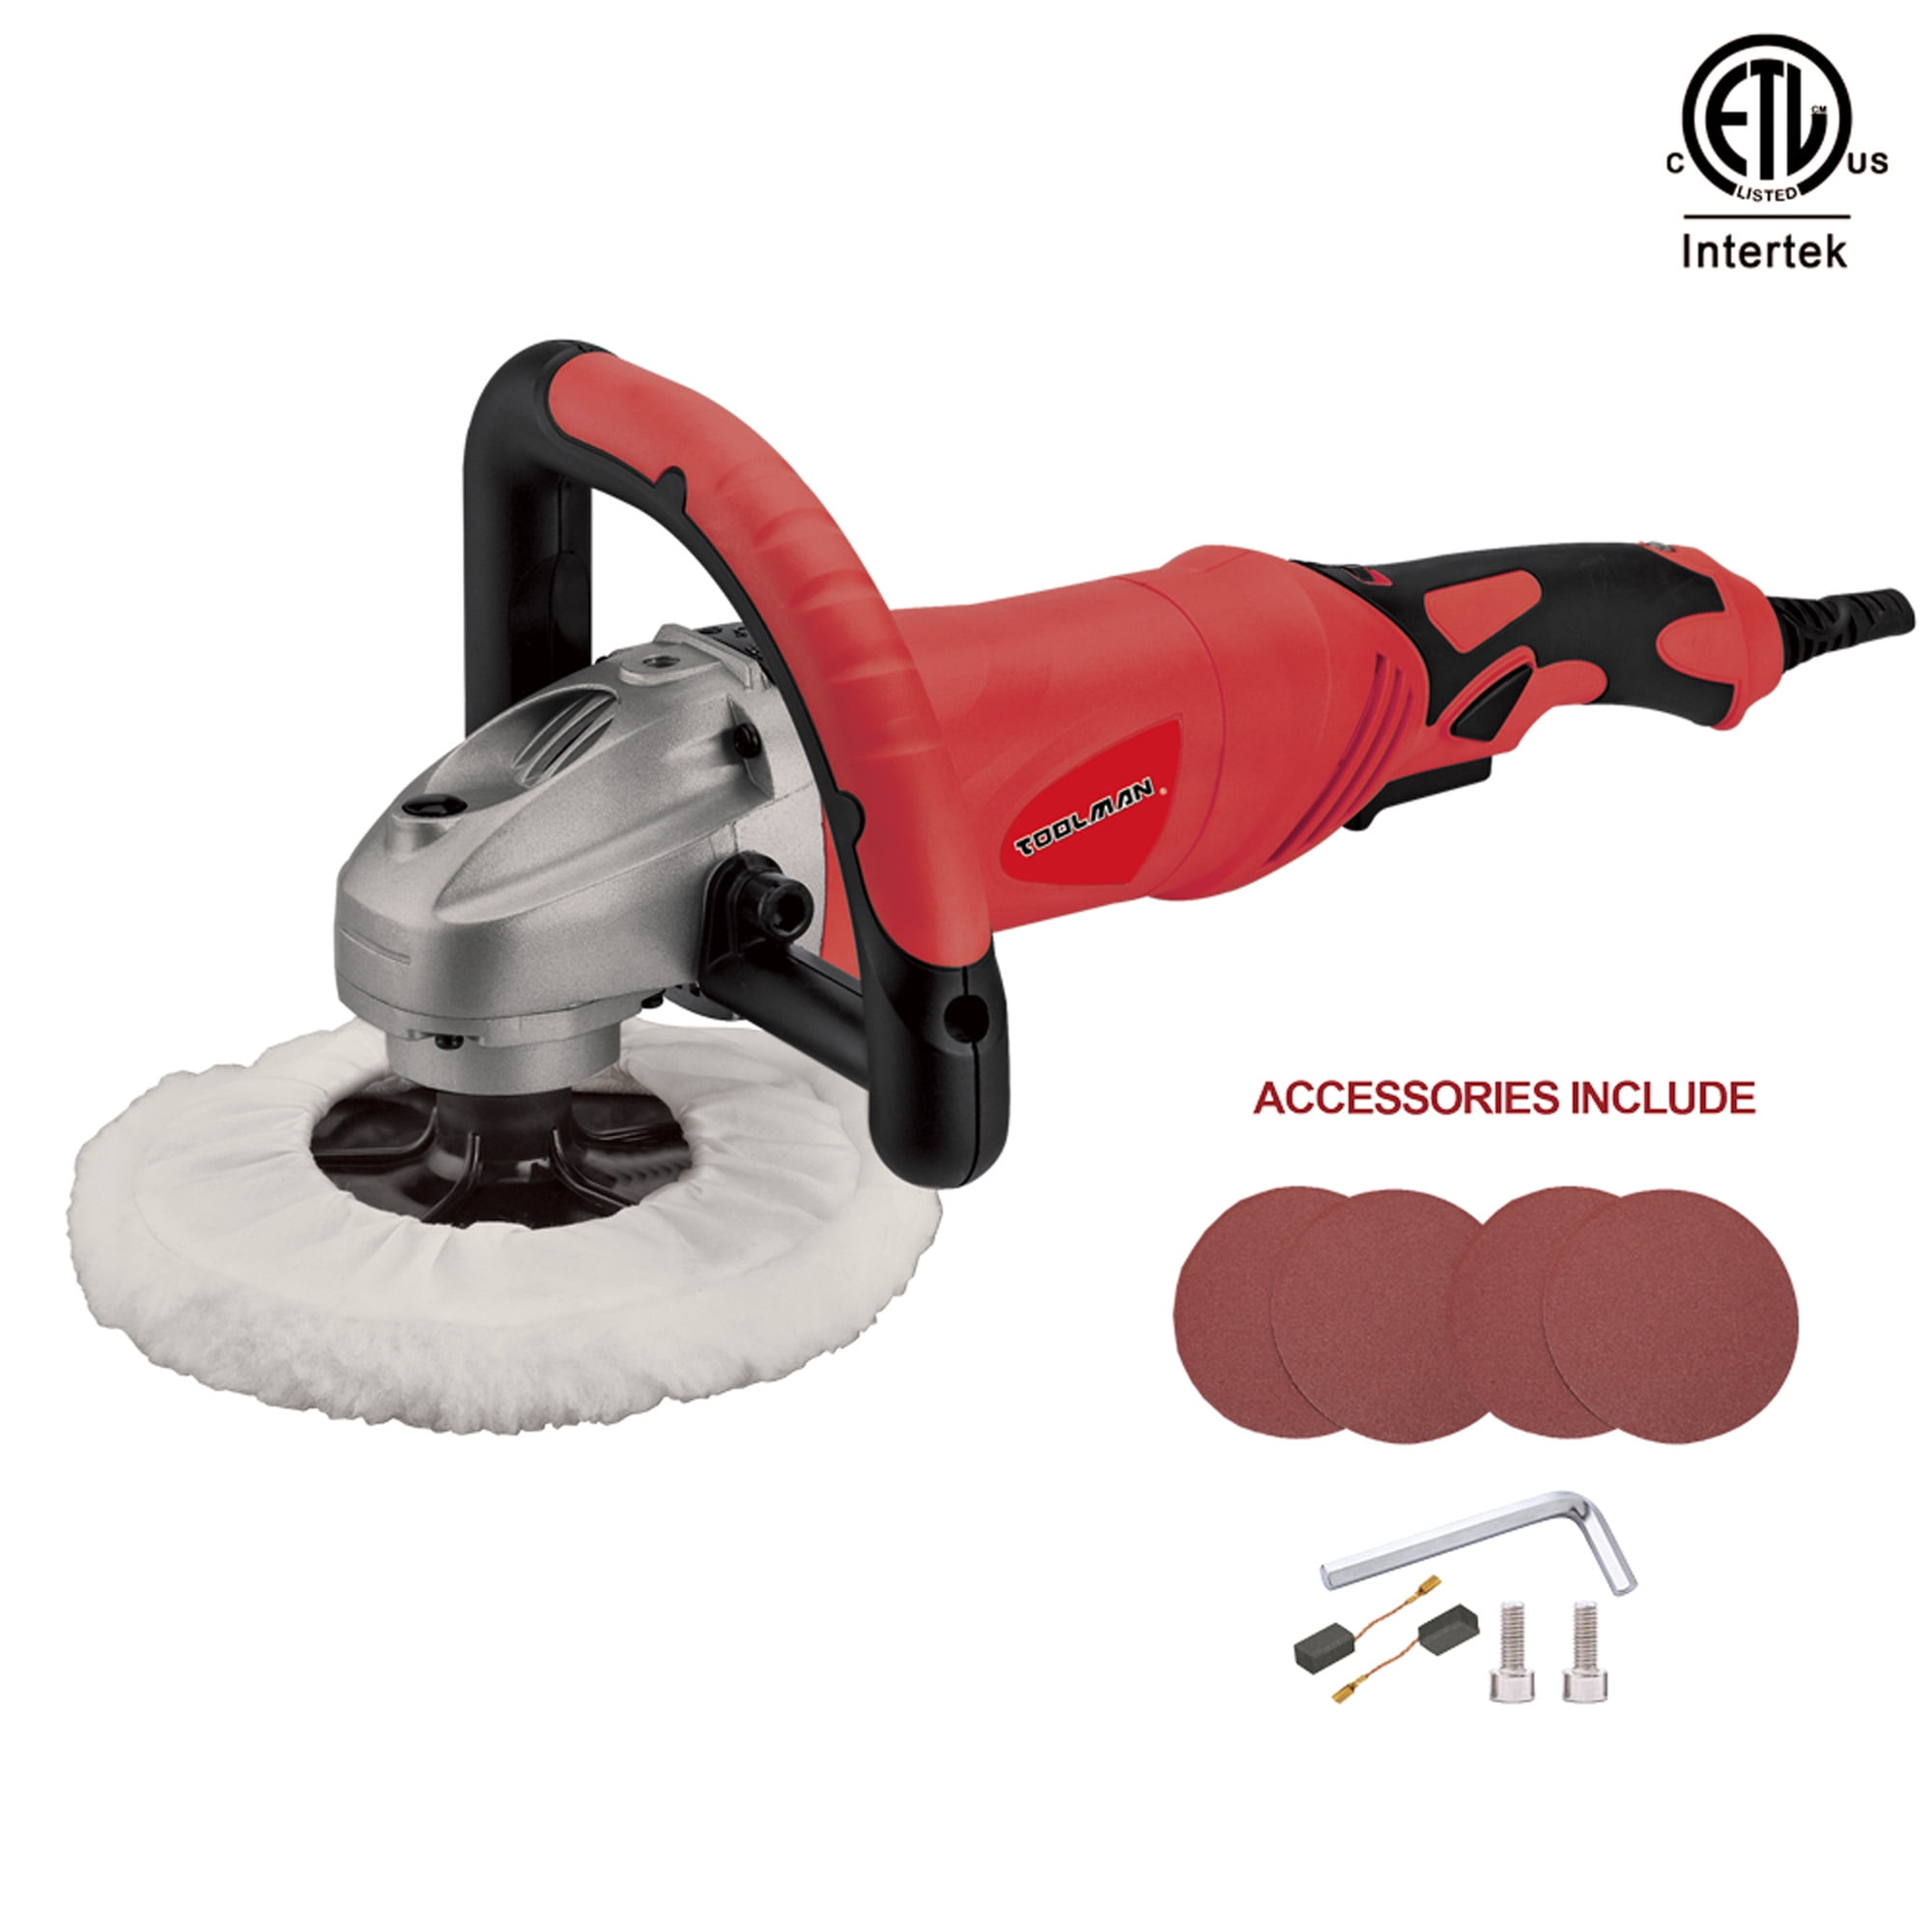 Toolman 7PCs Electric Polisher Sander Paint Care Tool 7" 12A amps Variable Speed 